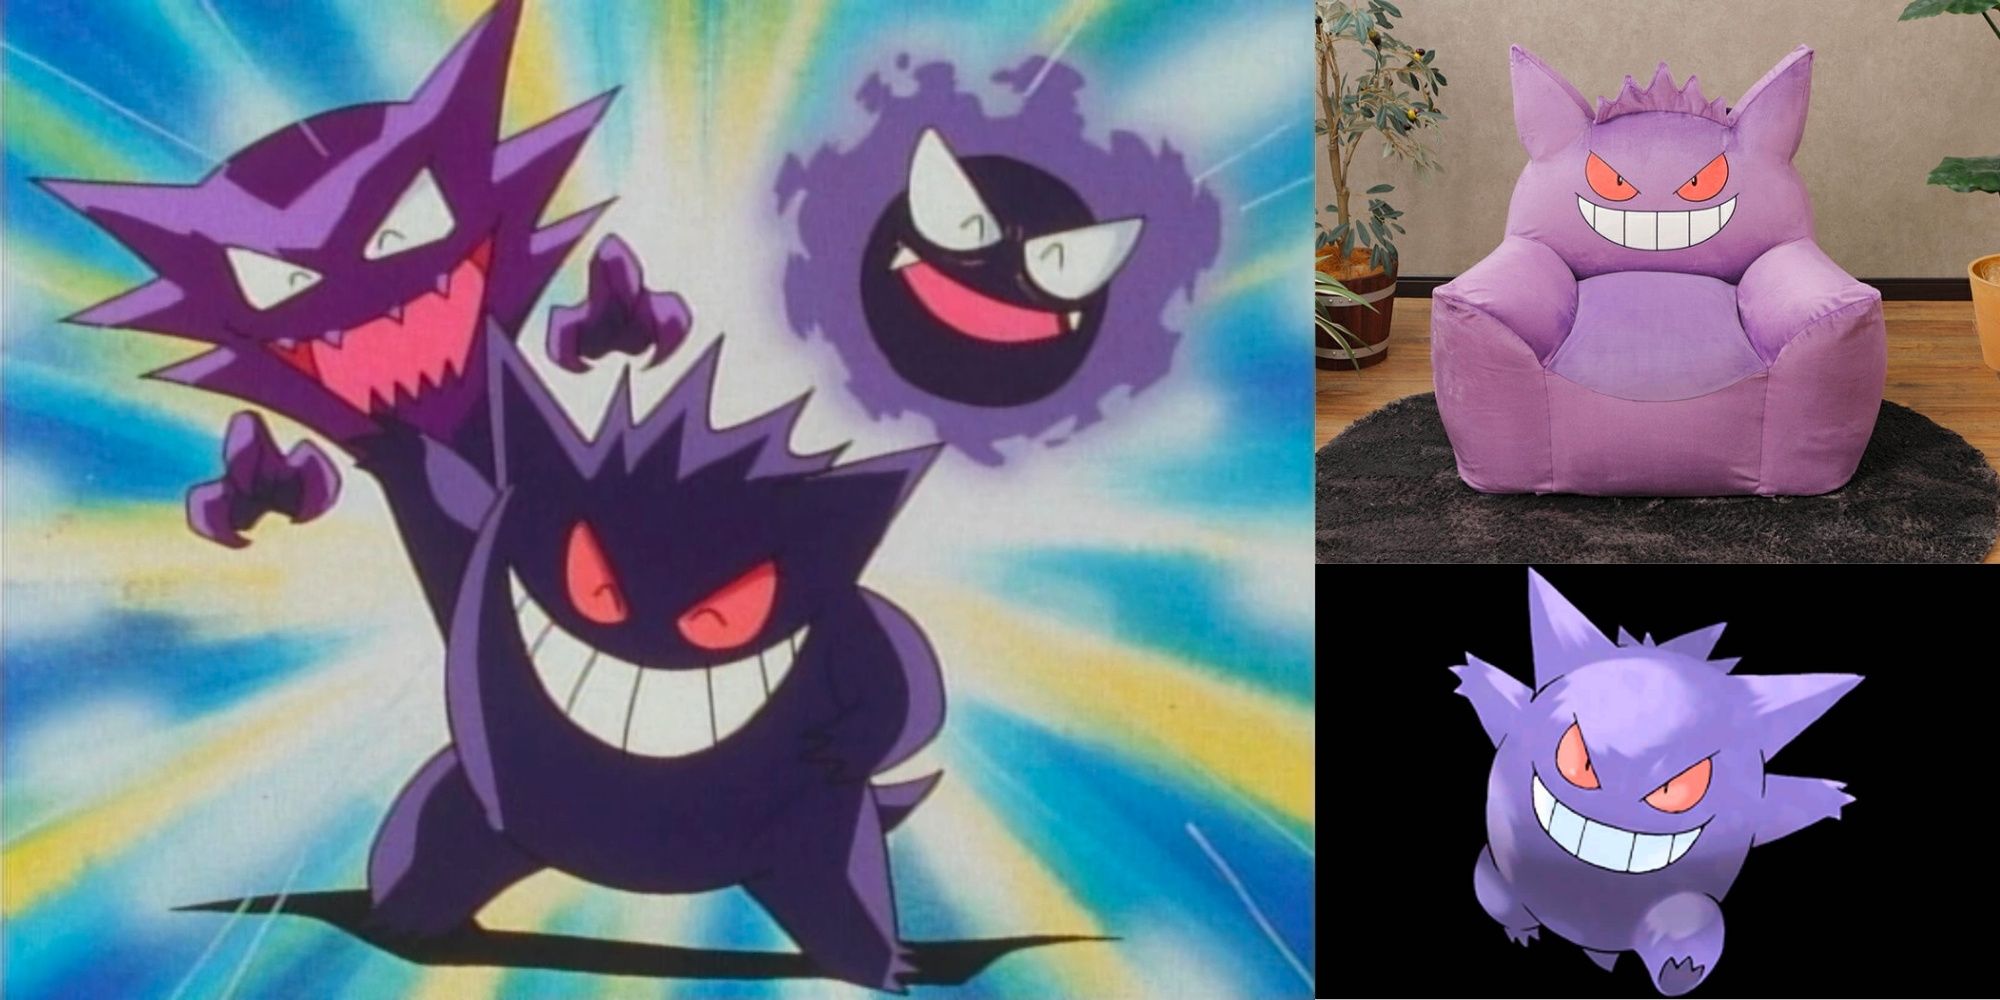 Ghost pokemon Gengar, Haunter, Gastly, a Genger Chair Nintendo Game and Anime Pokemon